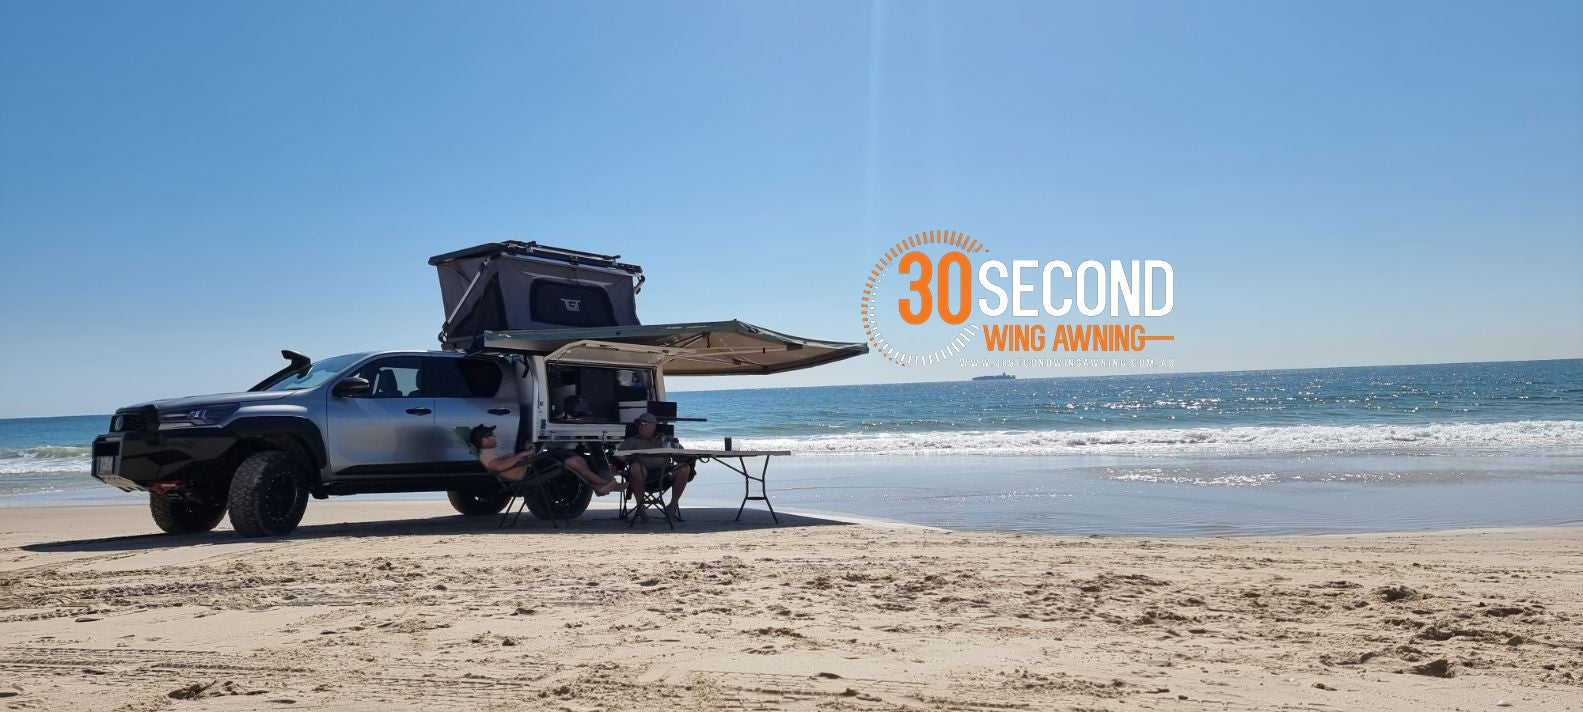 four wheel drive on a beach showing30 Second Awning brand